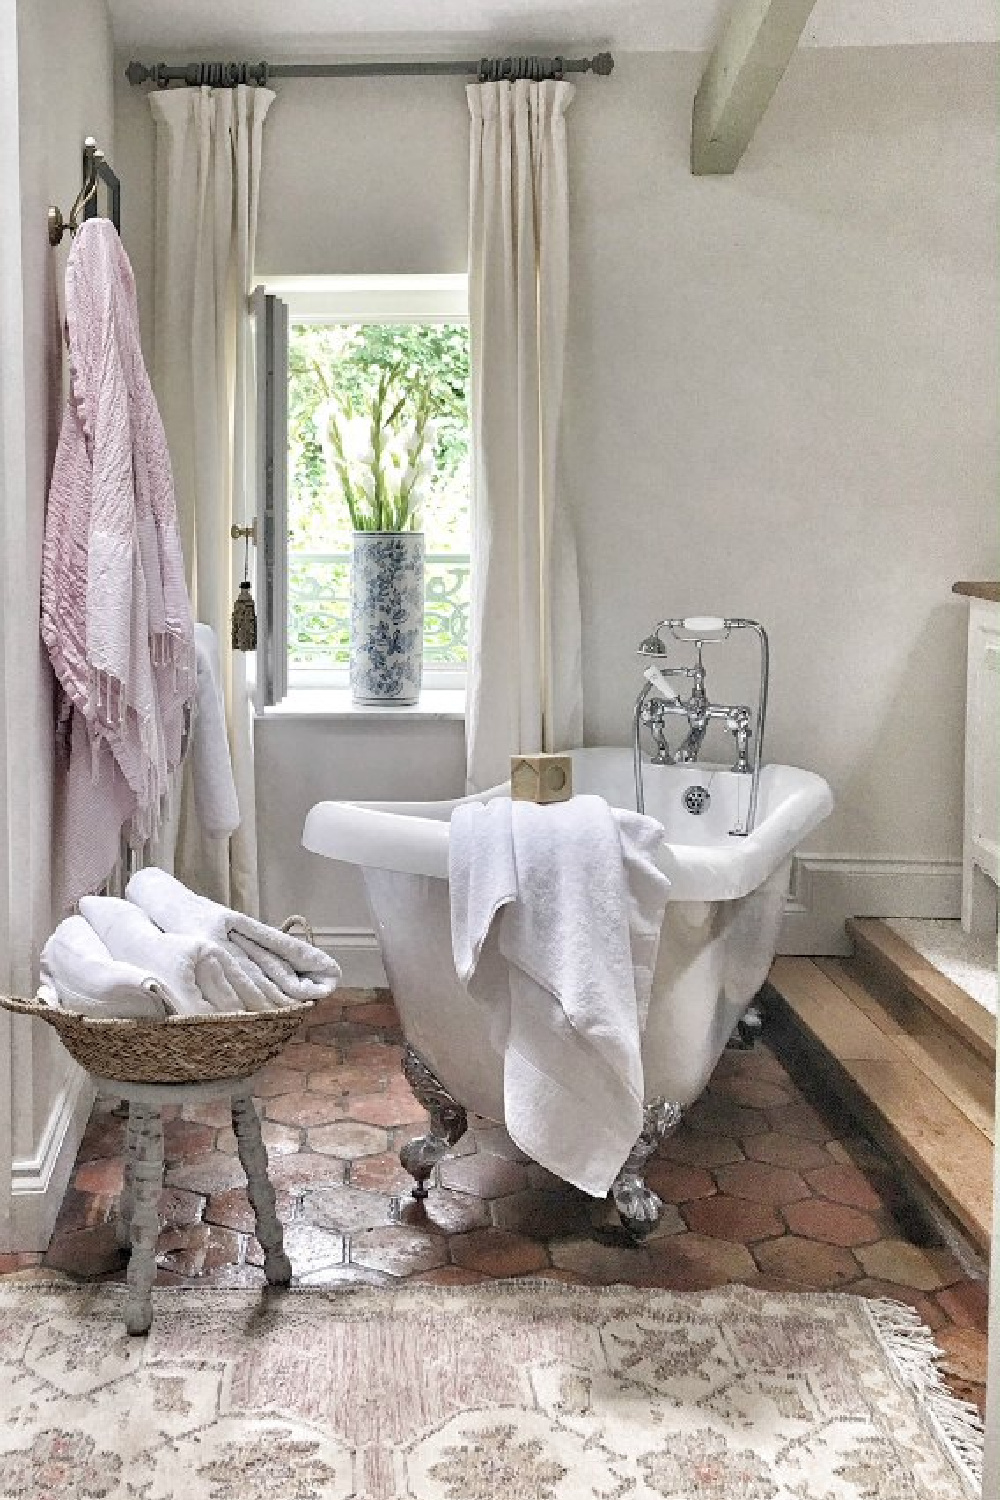 Farrow & Ball Strong White in a French farmhouse bathroom with clawfoot tub and reclaimed terracotta hex tile floor - Vivi et Margot.